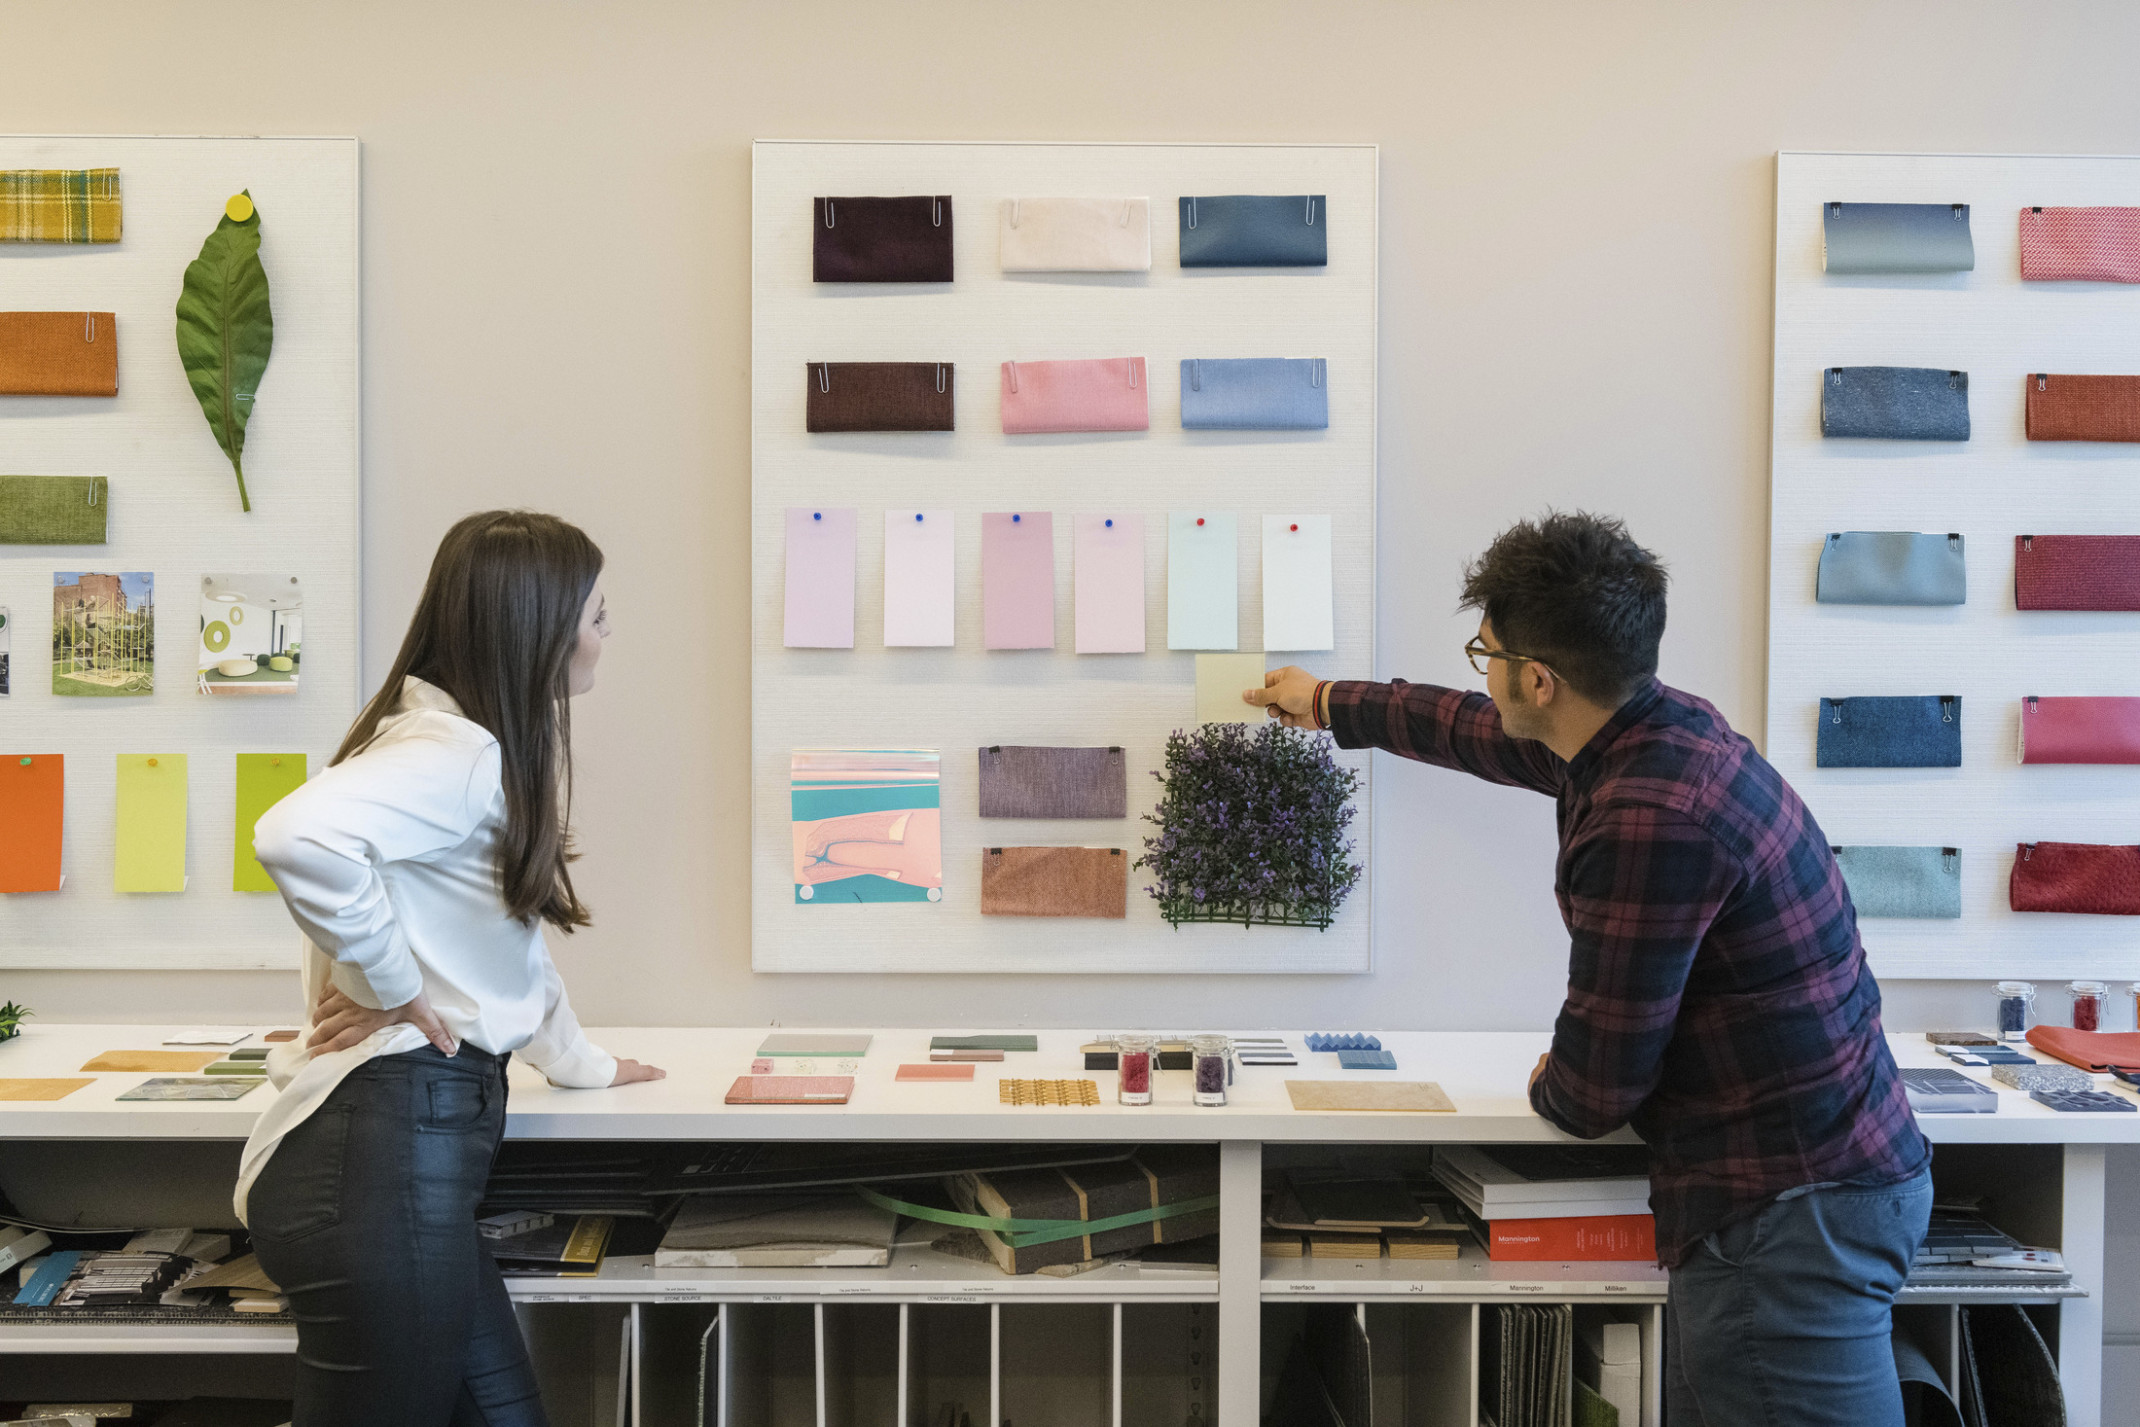 two people looking at a white board pinned on a wall filled with evenly spaced paper and fabric swatches in purple colorways